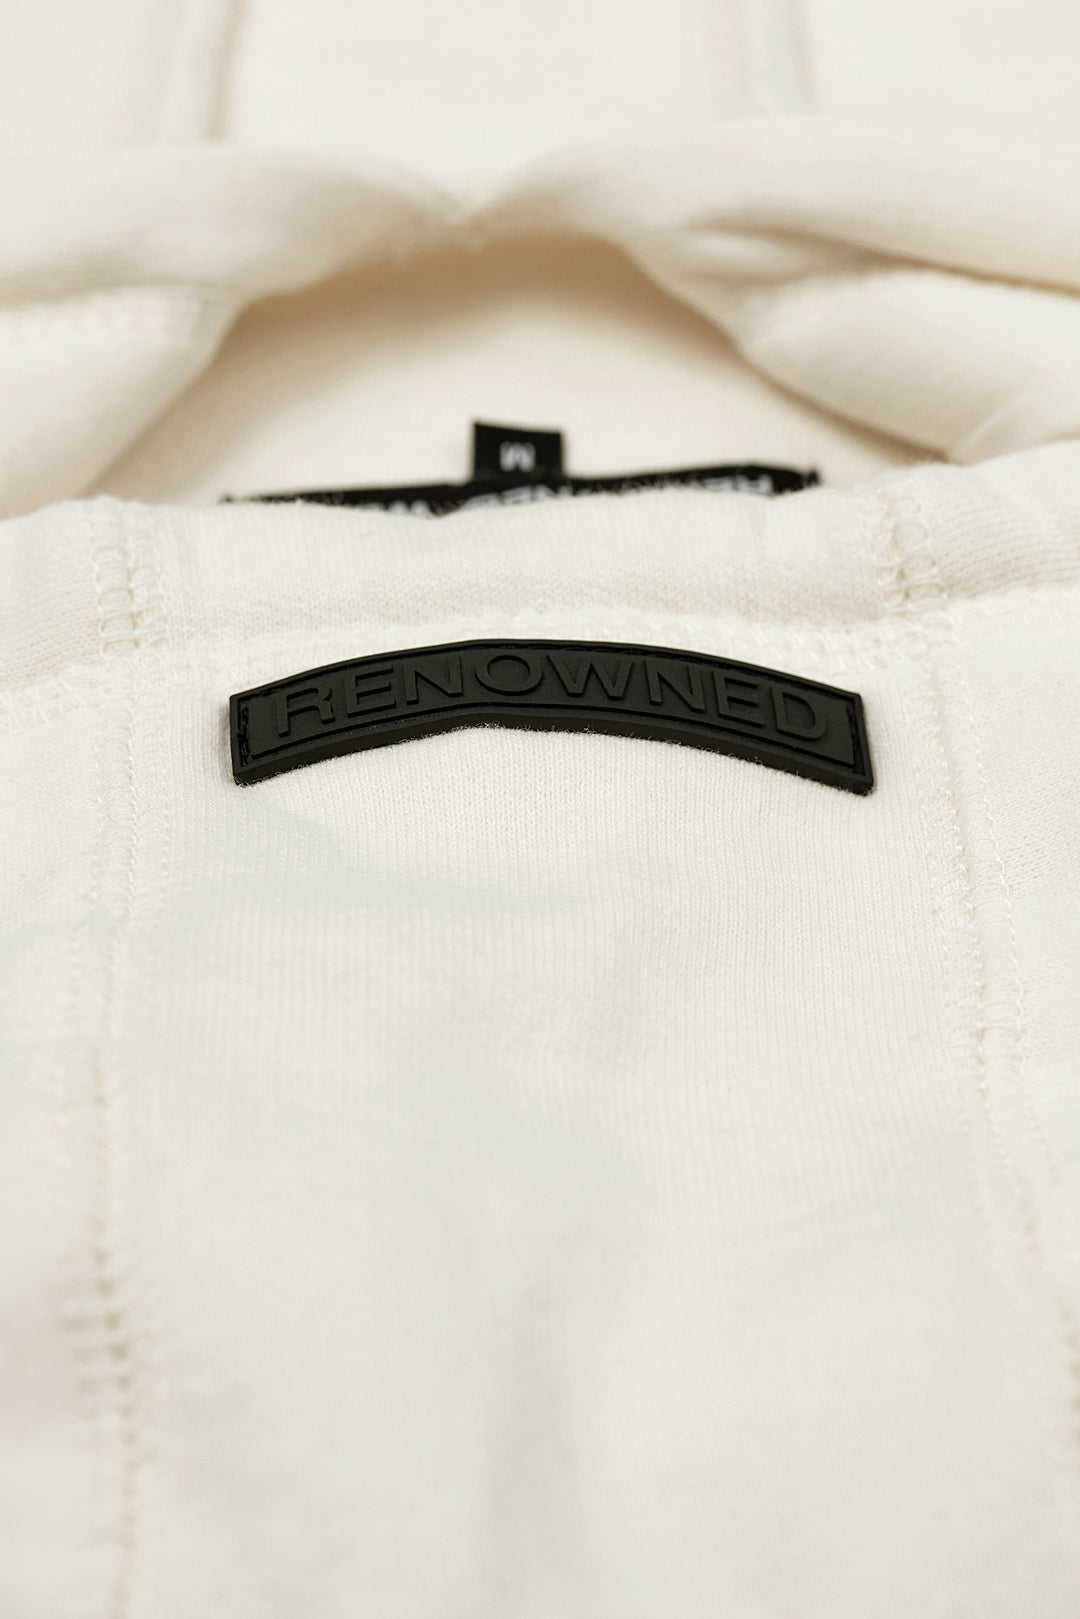 Rubber Label Detail of the Cream Colored Premium 400gsm Heavyweight Hoodie by RENOWNED WEAR